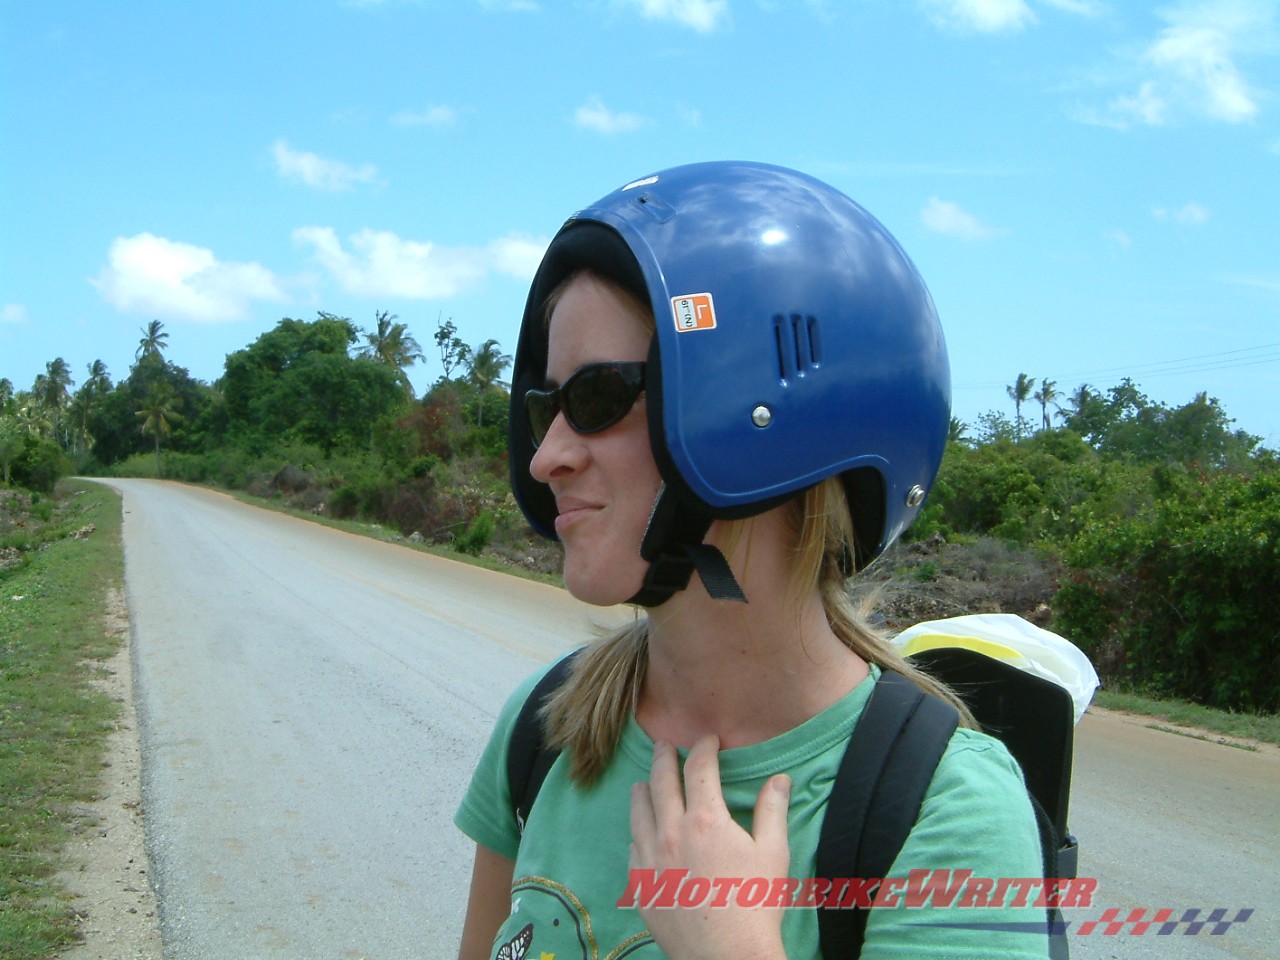 How not to wear a motorcycle helmet